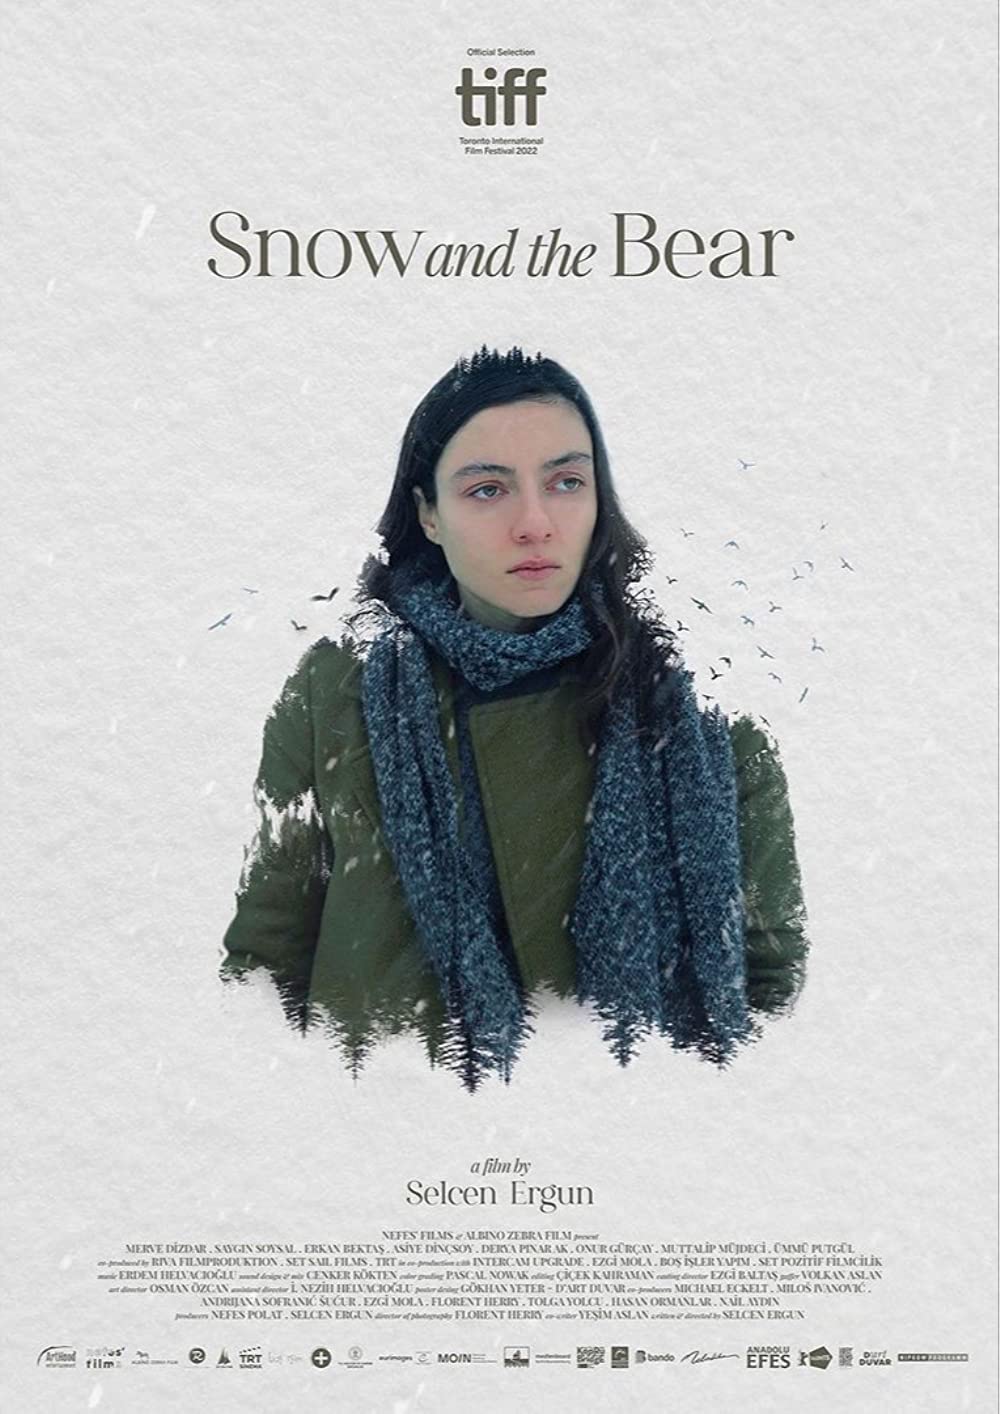 Produced by Hamburg-based Rivafilm, the drama "Snow and the Bear" premiered in Toronto and won two awards at the Antalya Golden Orange Film Festival. | MOIN Filmförderung